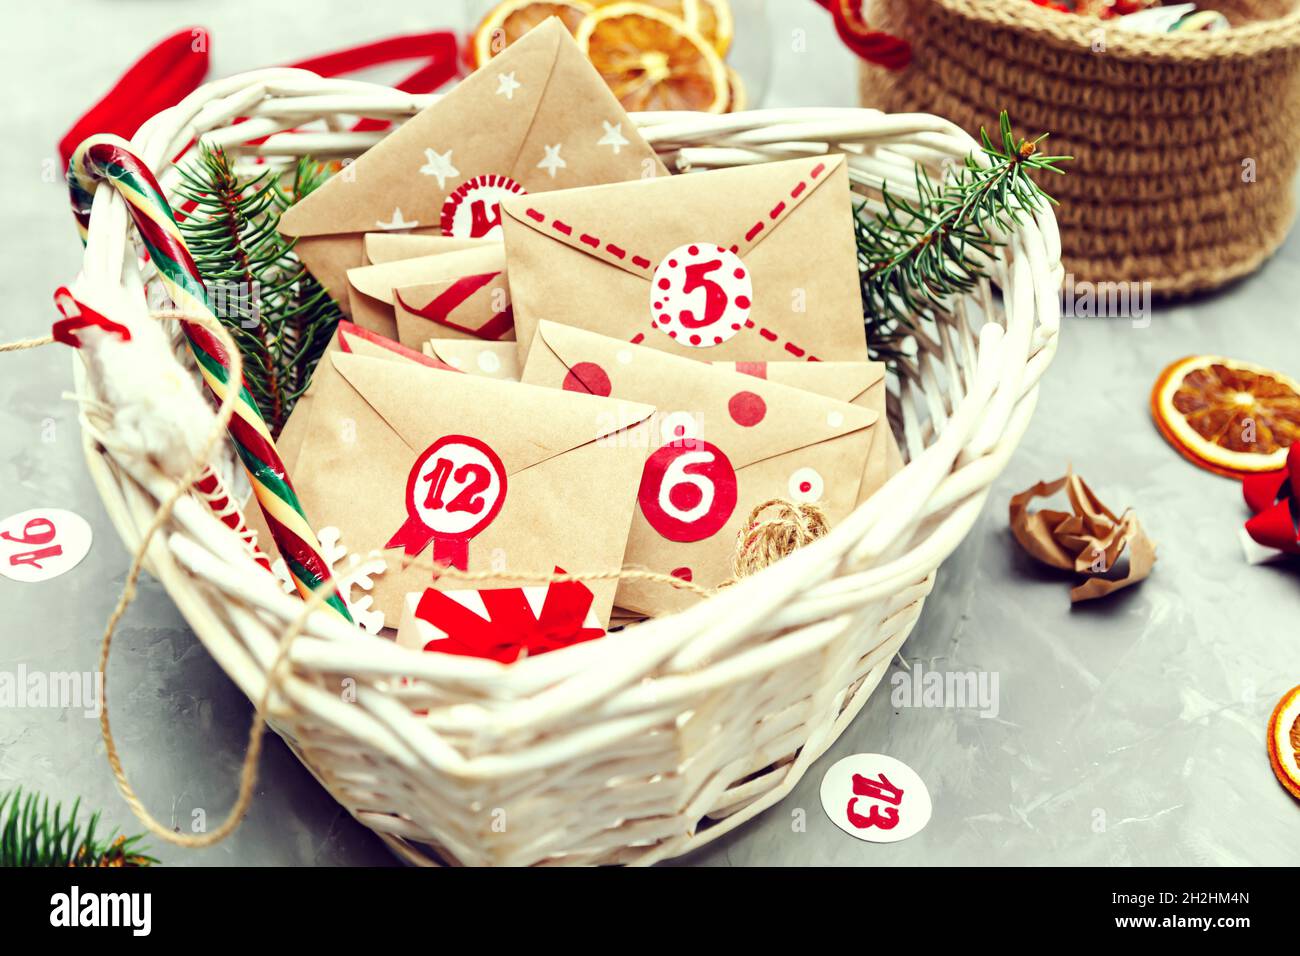 Advent calendar waiting for Christmas. Collection of small envelopes in  basket with numbers and tasks for children. Seasonal Christmas tradition. Stock Photo